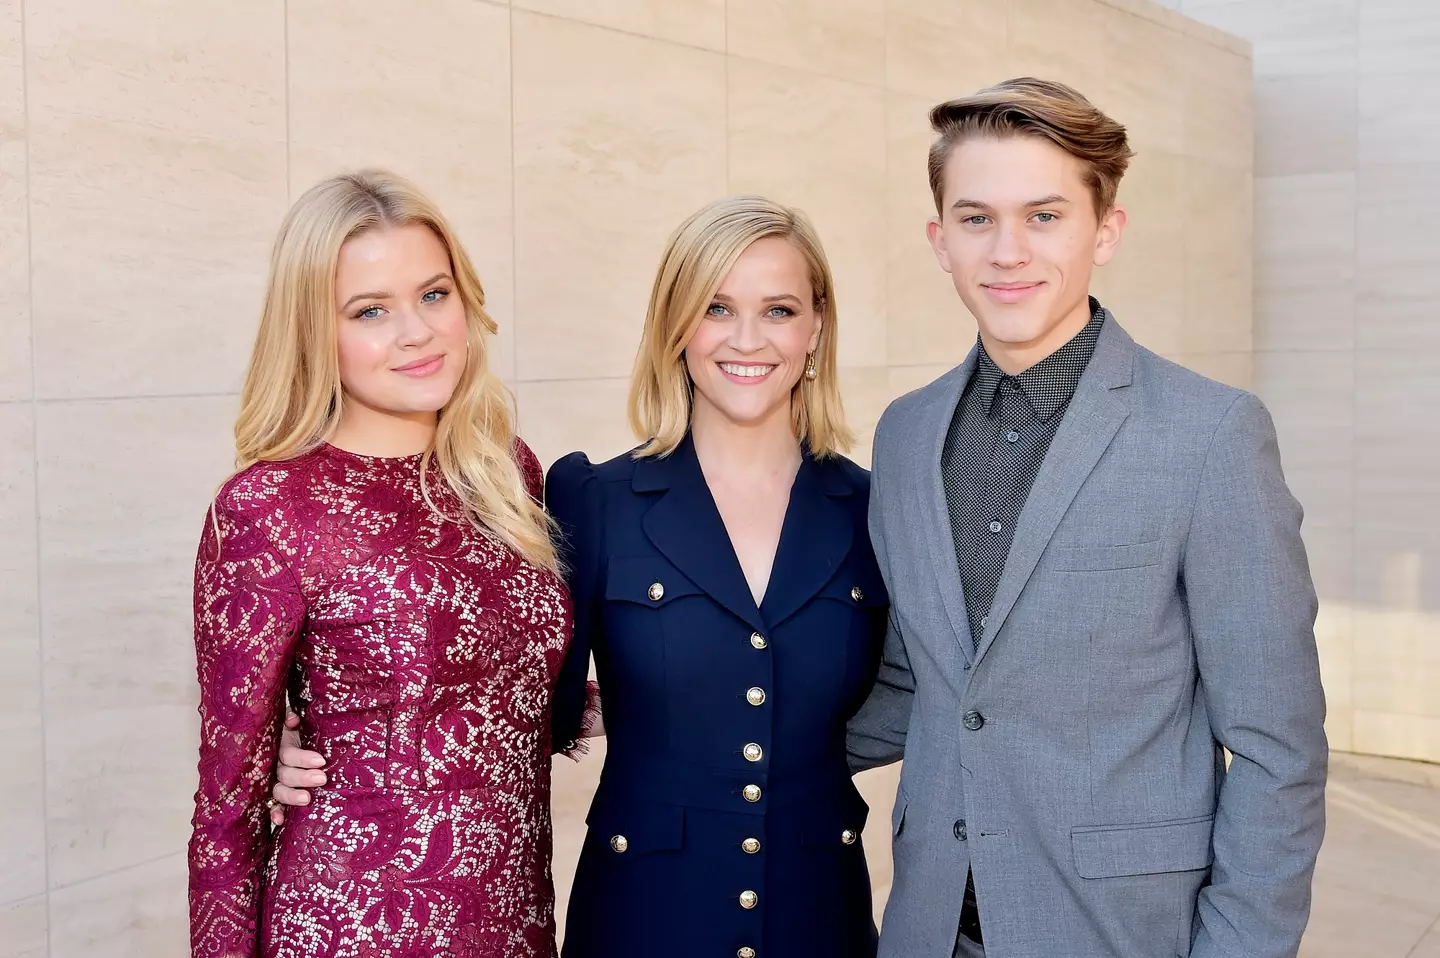 Reese Witherspoon shares kids Ava and Deacon with ex husband Ryan Phillippe.